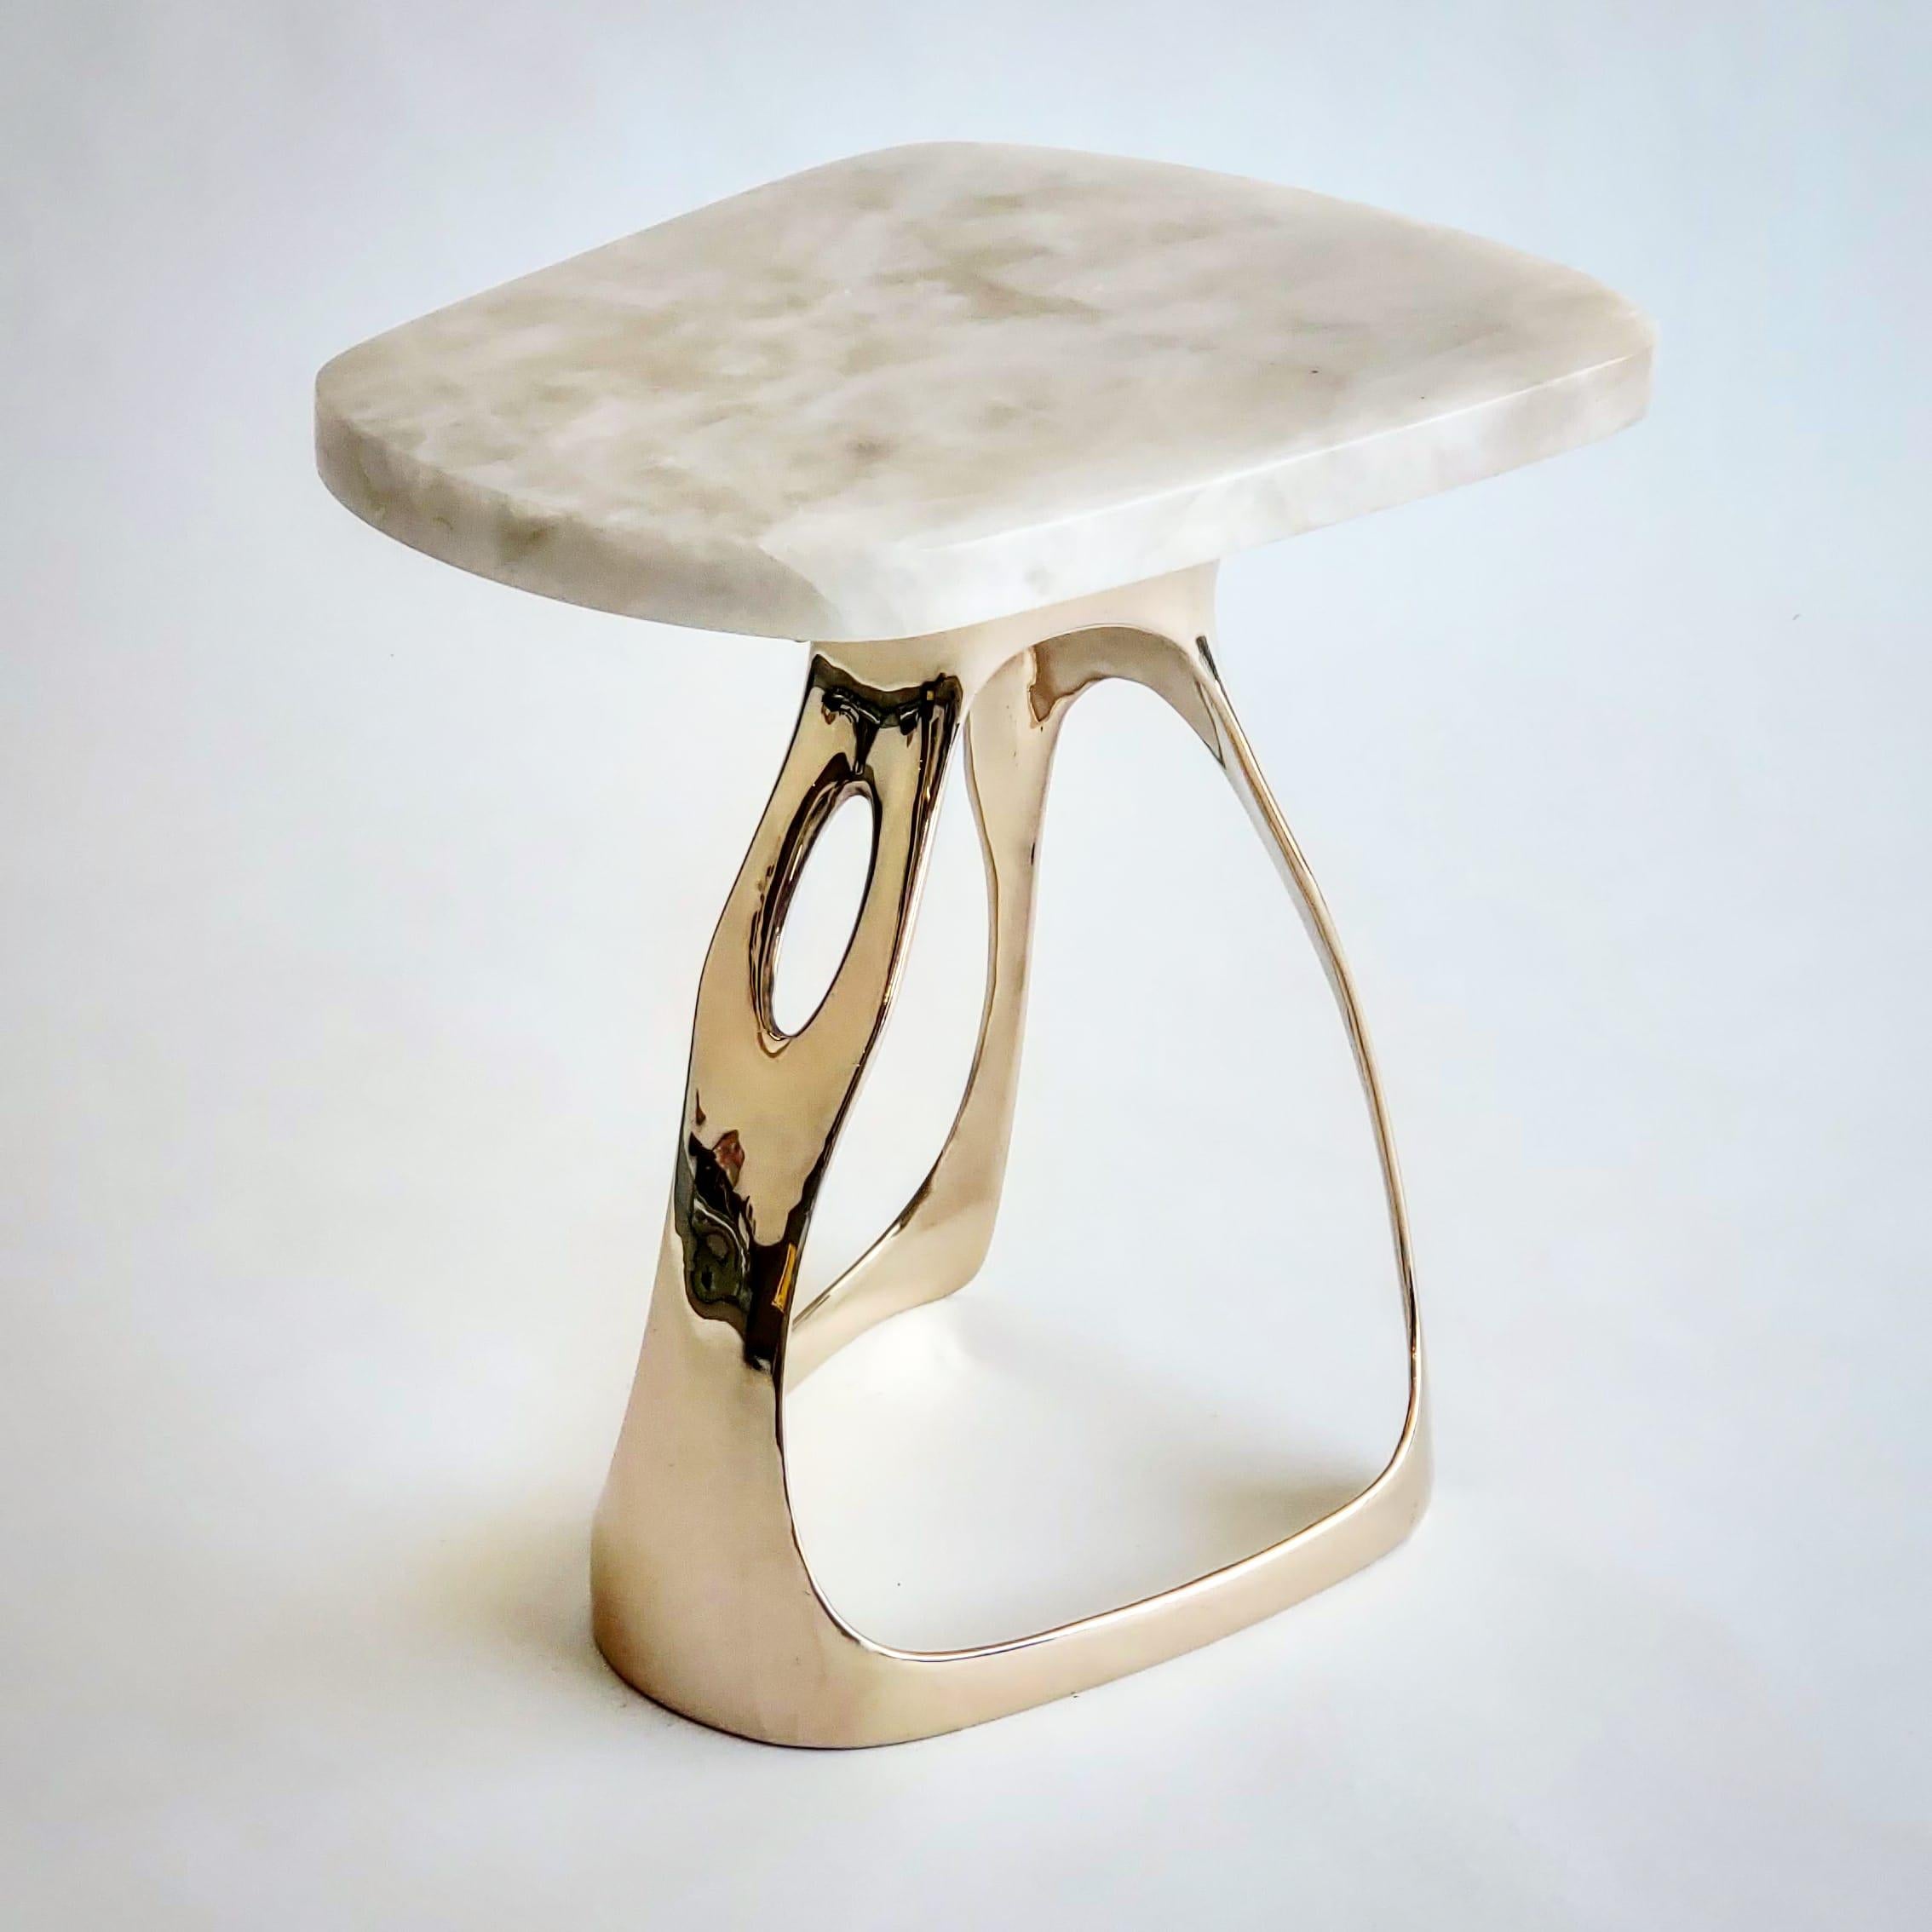 The Pyra drink table is a playfully organic piece of functional art. The piece is cast in bronze, hand polished and fitted with a prominent top cut from beautiful white quartzite stone. Materials - Bronze and white quartzite top.

Hand forged and